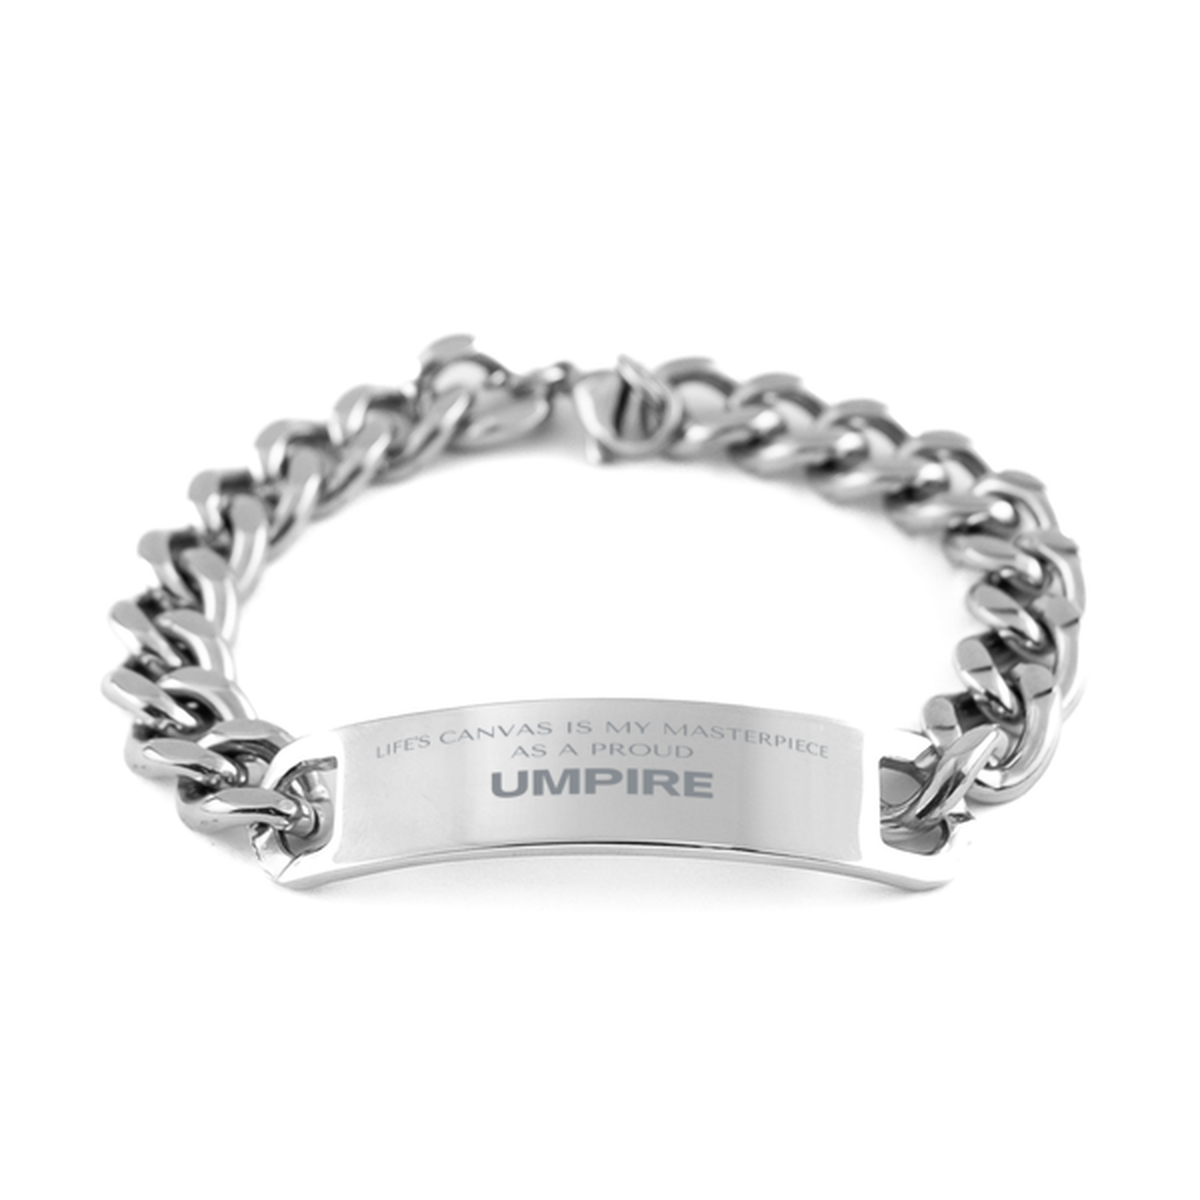 Proud Umpire Gifts, Life's canvas is my masterpiece, Epic Birthday Christmas Unique Cuban Chain Stainless Steel Bracelet For Umpire, Coworkers, Men, Women, Friends